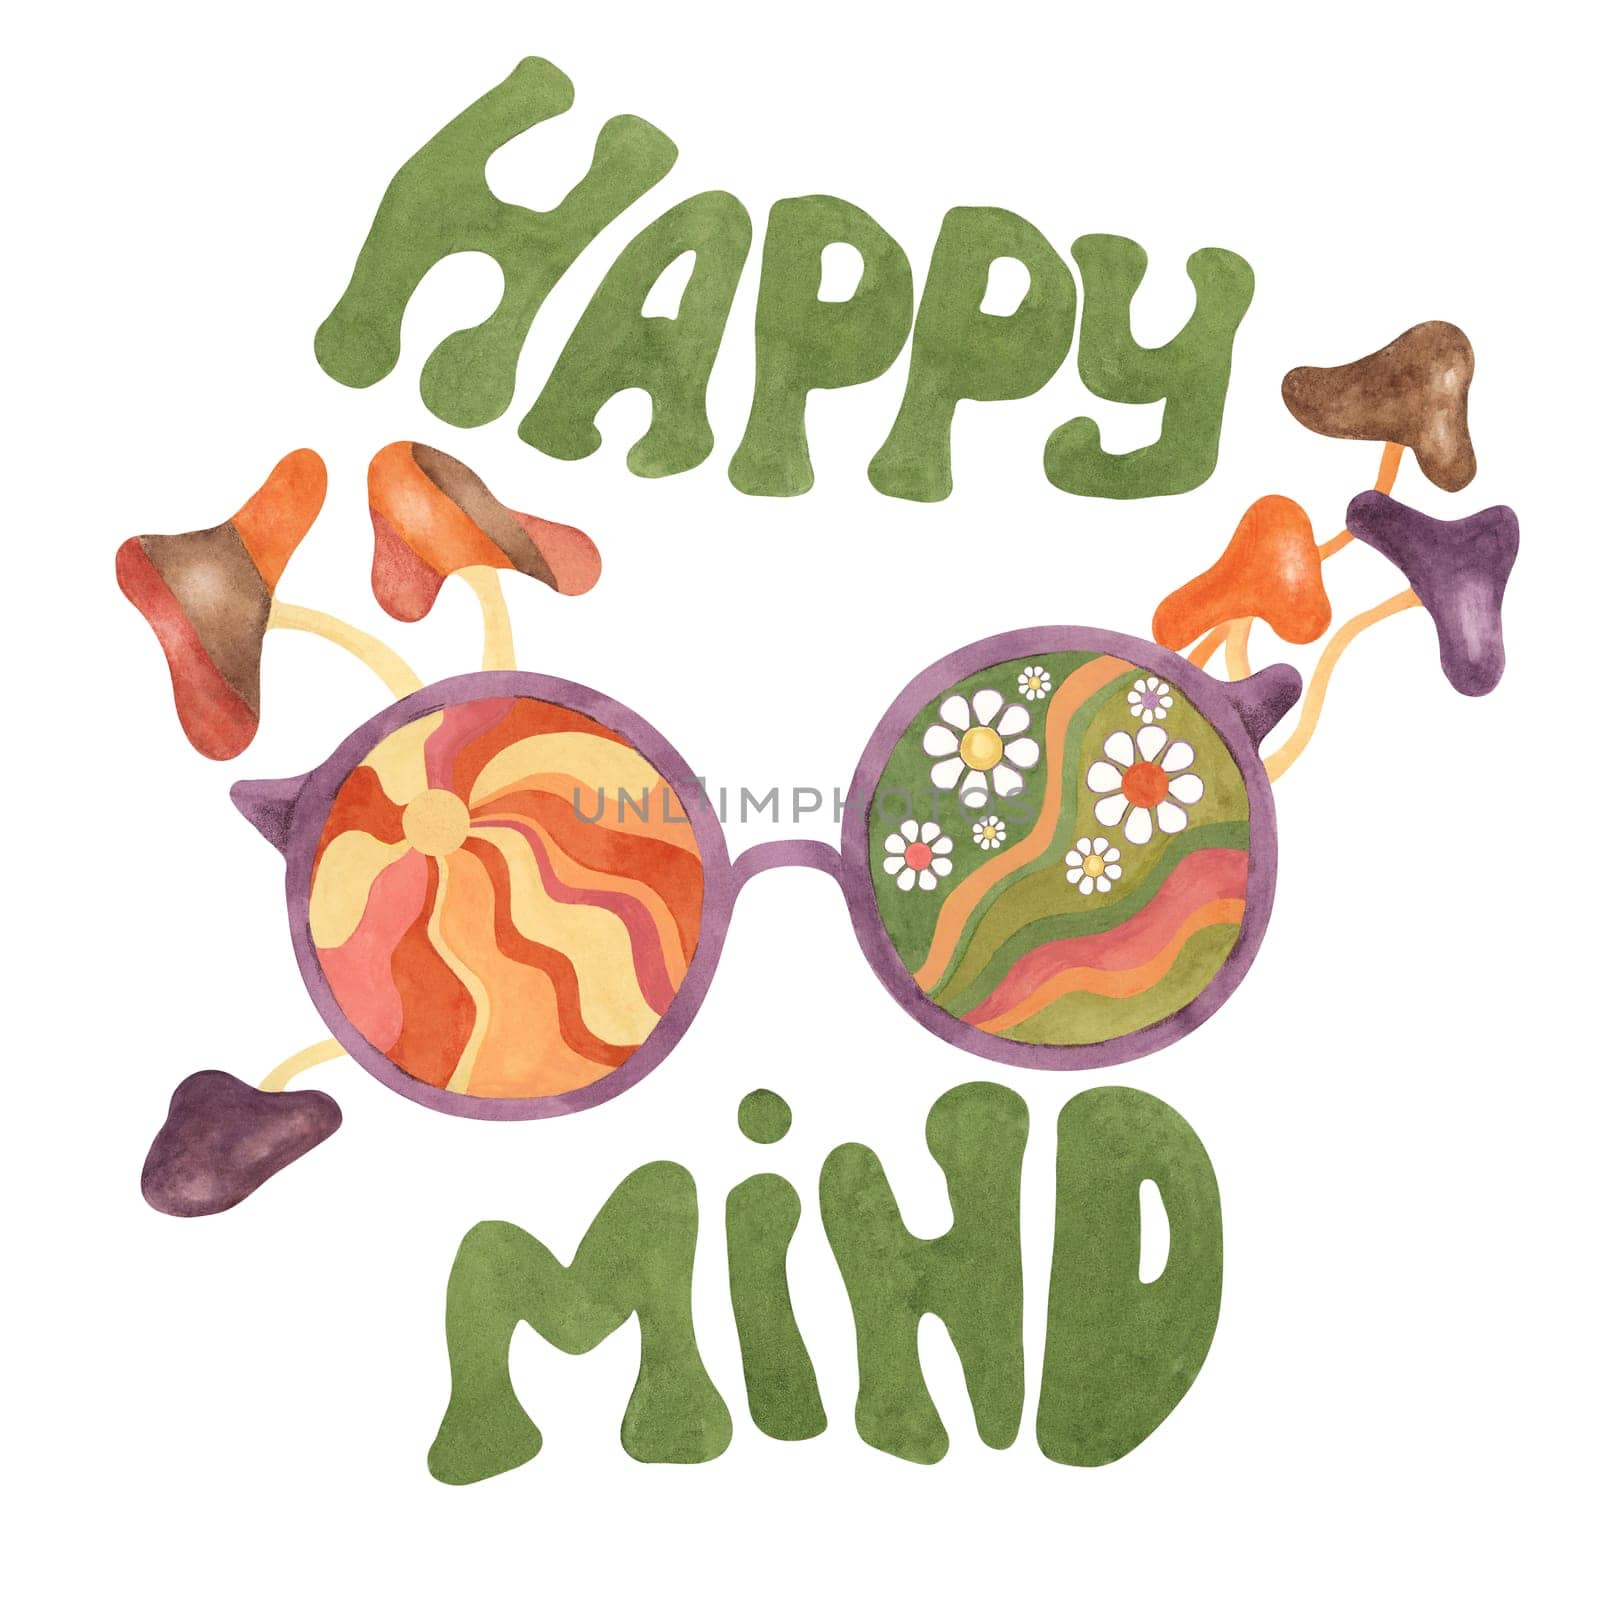 Trippy mushrooms, groovy hippie sunglasses and happy mind slogan print tee with sun and daisies. Retro round psychedelic eyewear in 1970s style. Nostalgic clipart. Hand drawn graphic indie t shirt